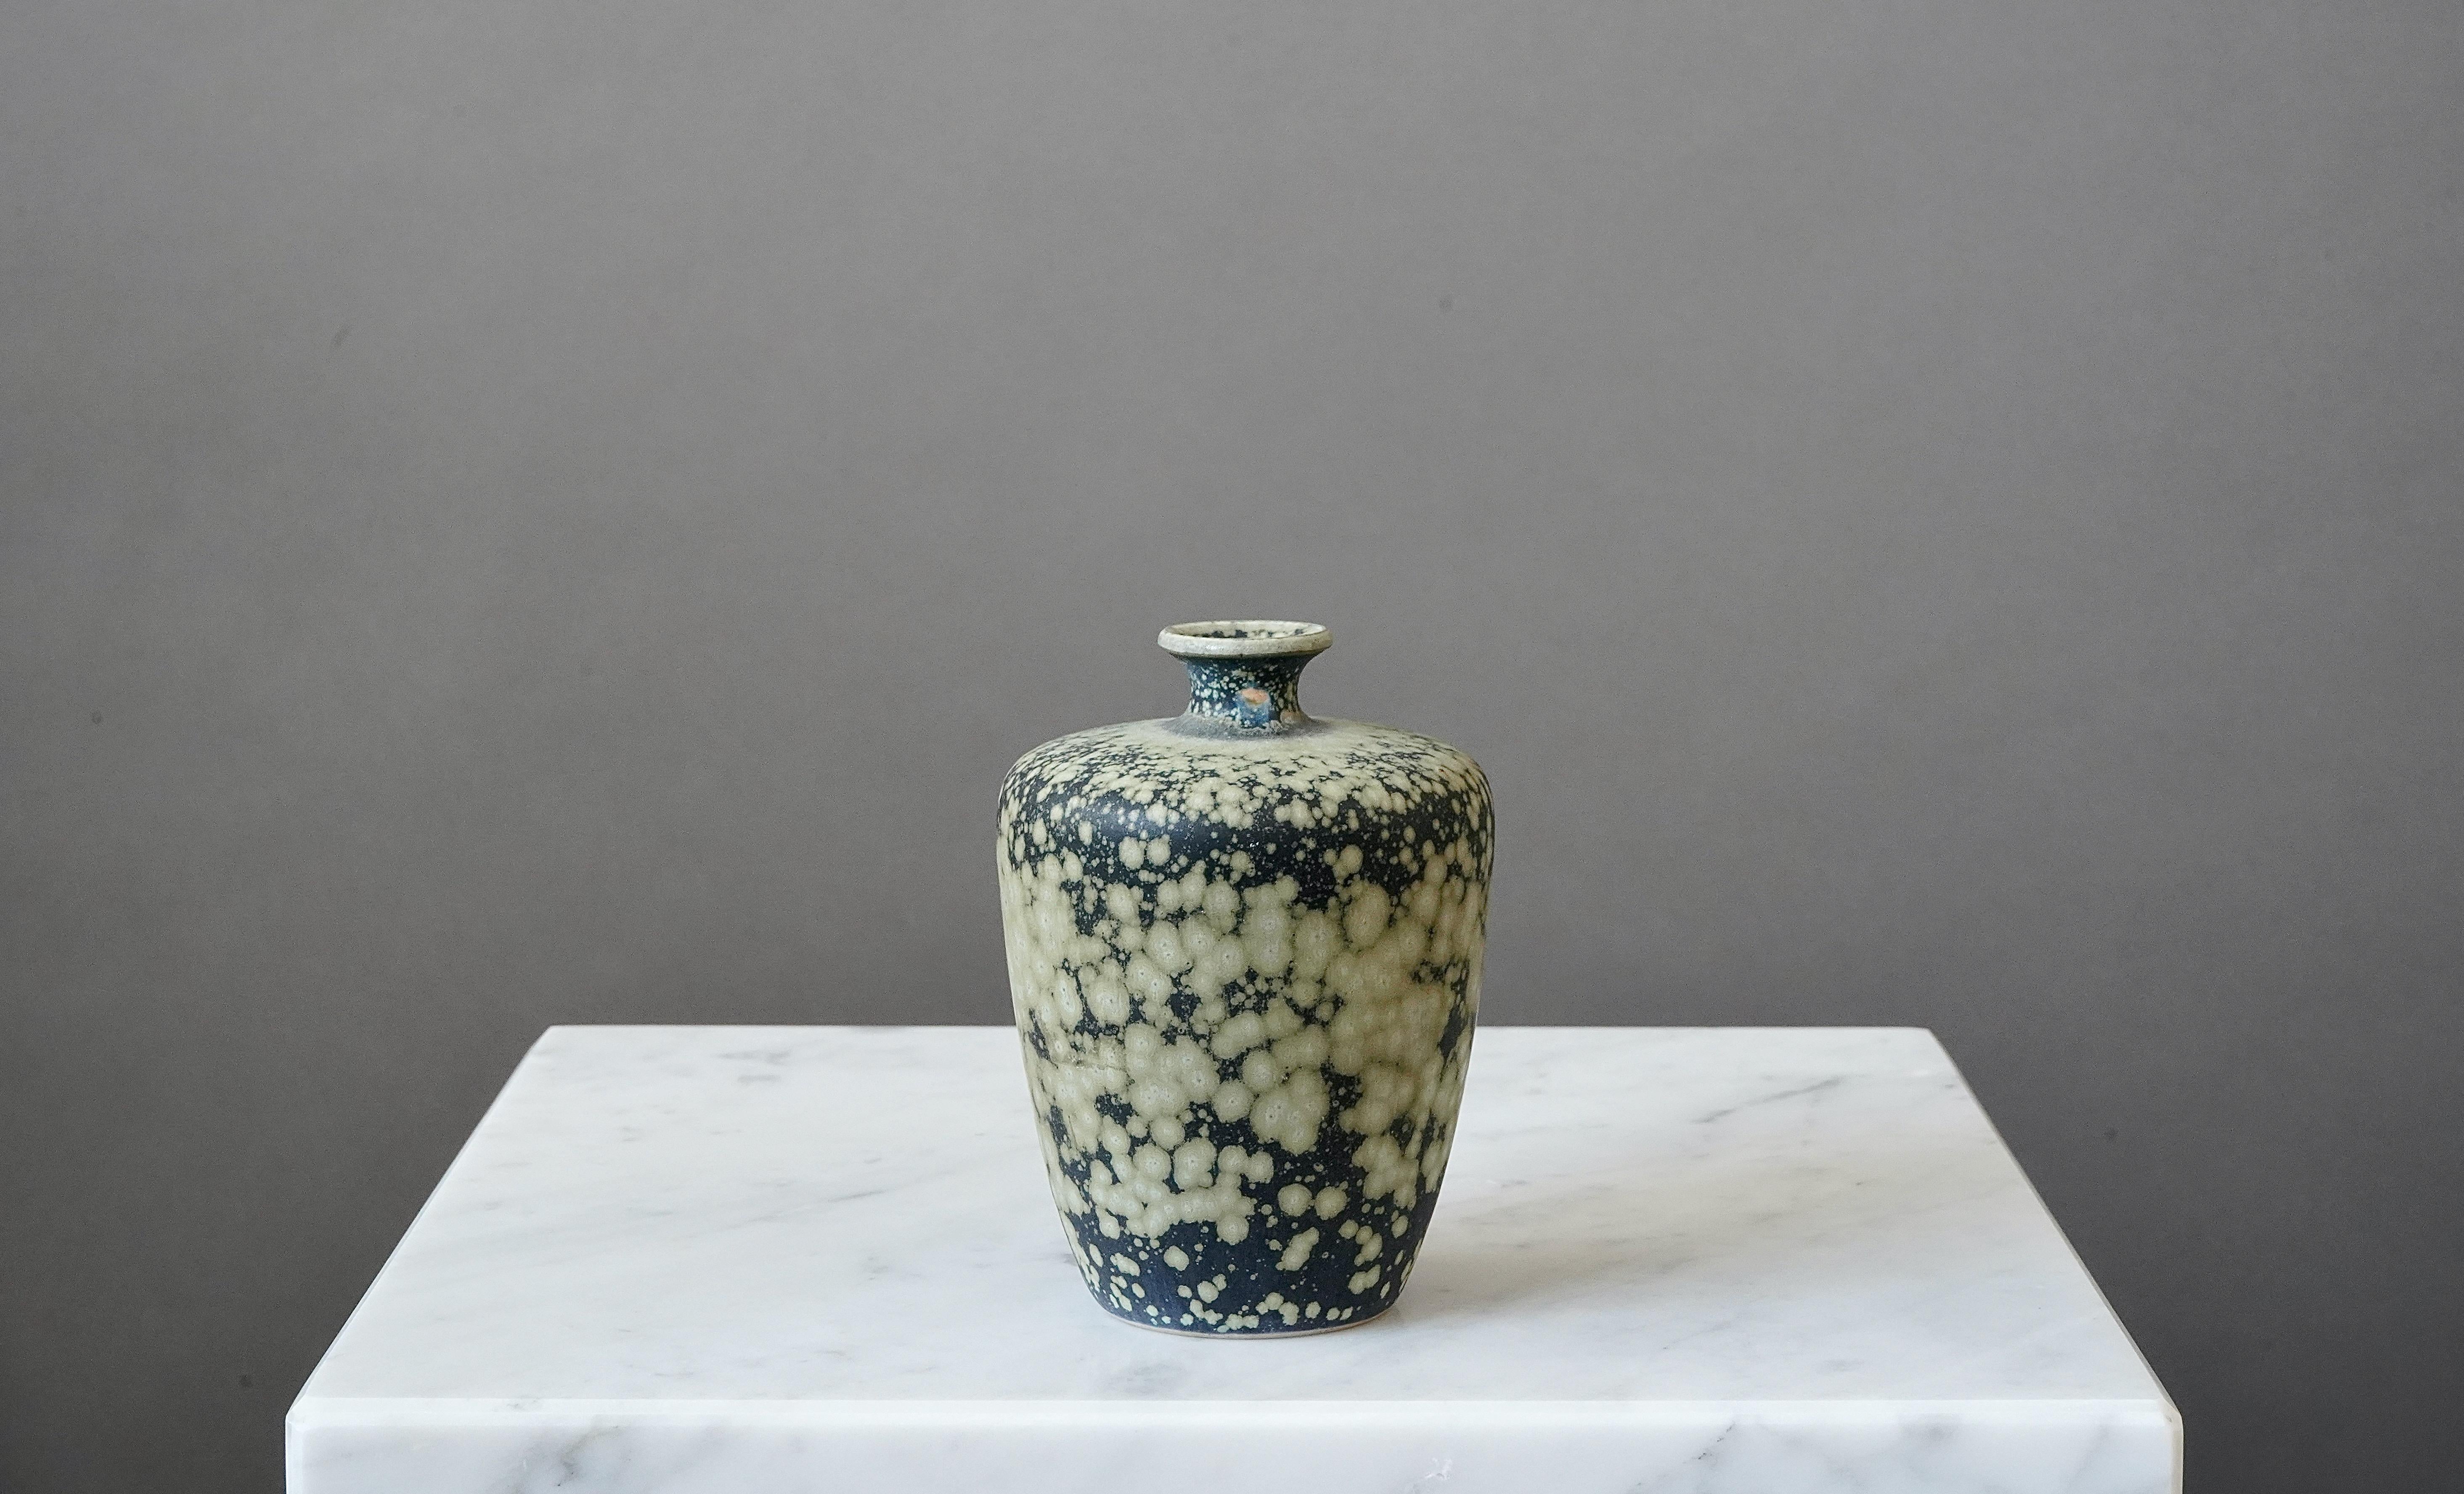 A beautiful small stoneware vase with amazing glaze. 
Made by Rolf Palm, in the artist's studio, Mölle, Sweden, 1980.

Incised ’Palm / Mölle / H0’ and marked ’413’.
Good overall condition, but the vase has a glaze flaw on the neck, from